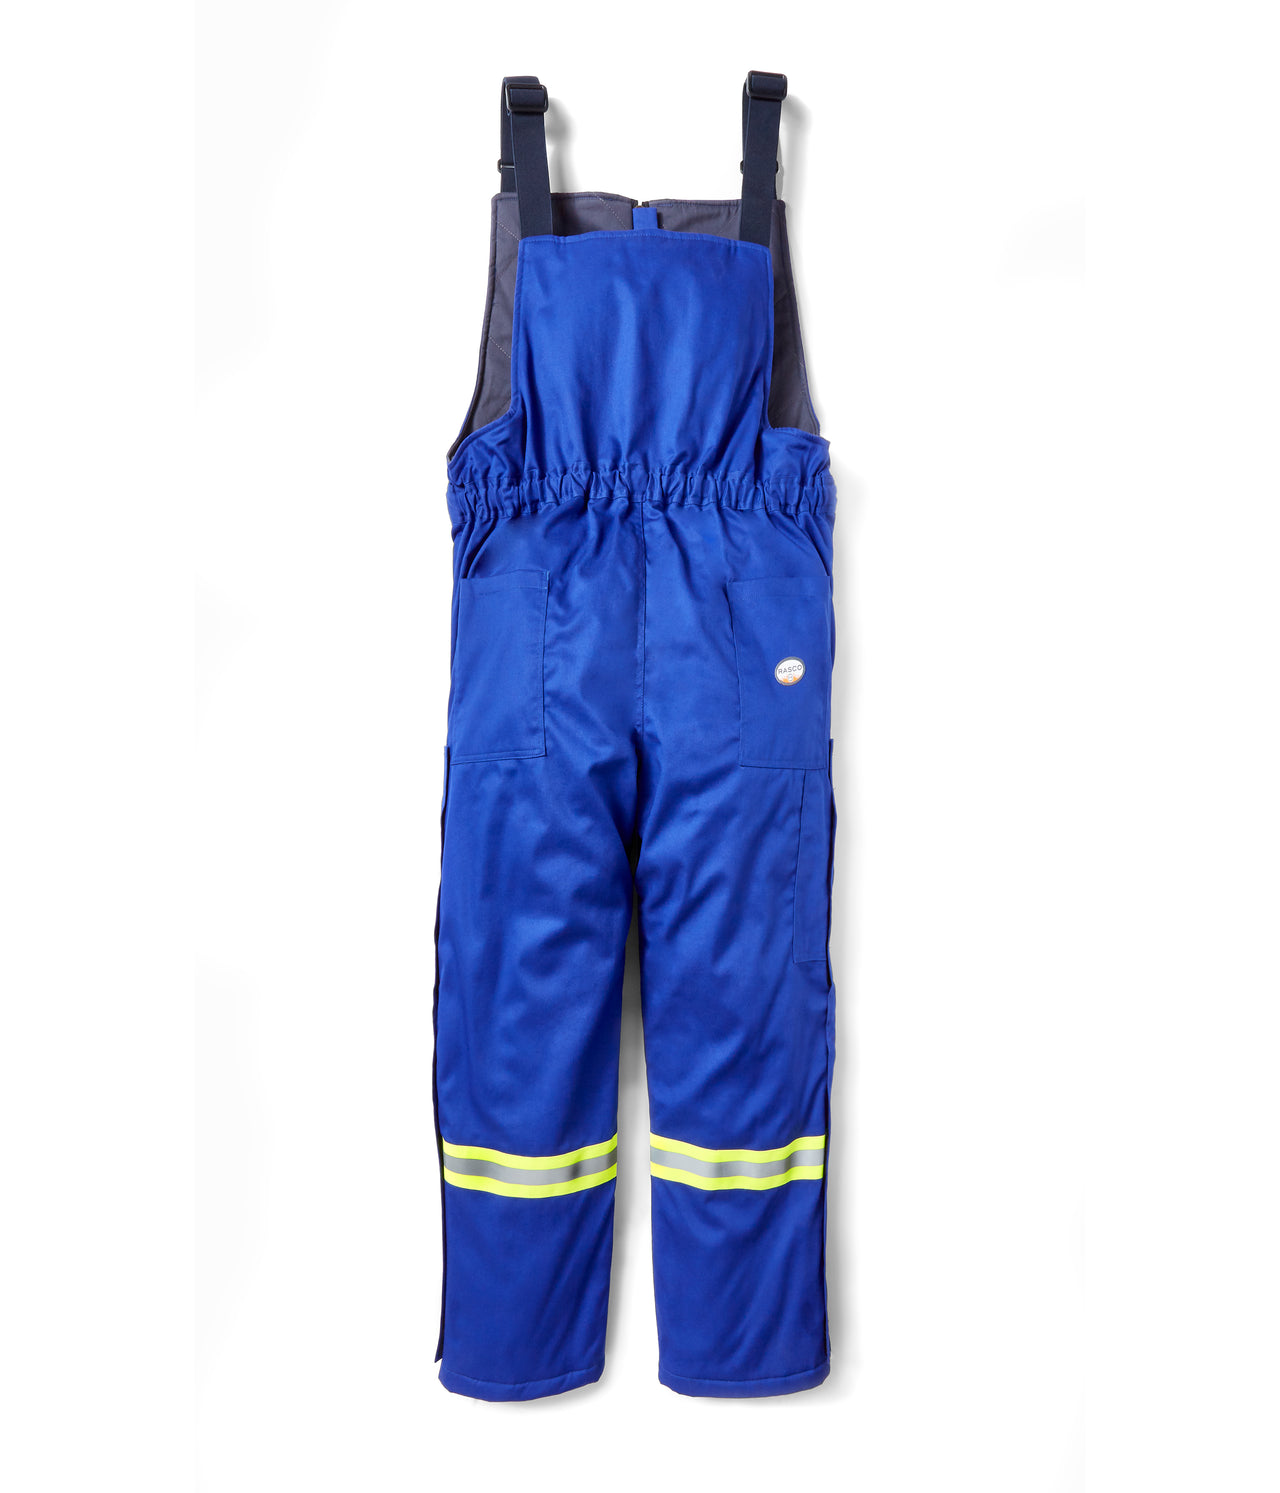 Rasco FR Royal Blue Insulated Bib Overall with 2" Reflective Tape FR2706RB